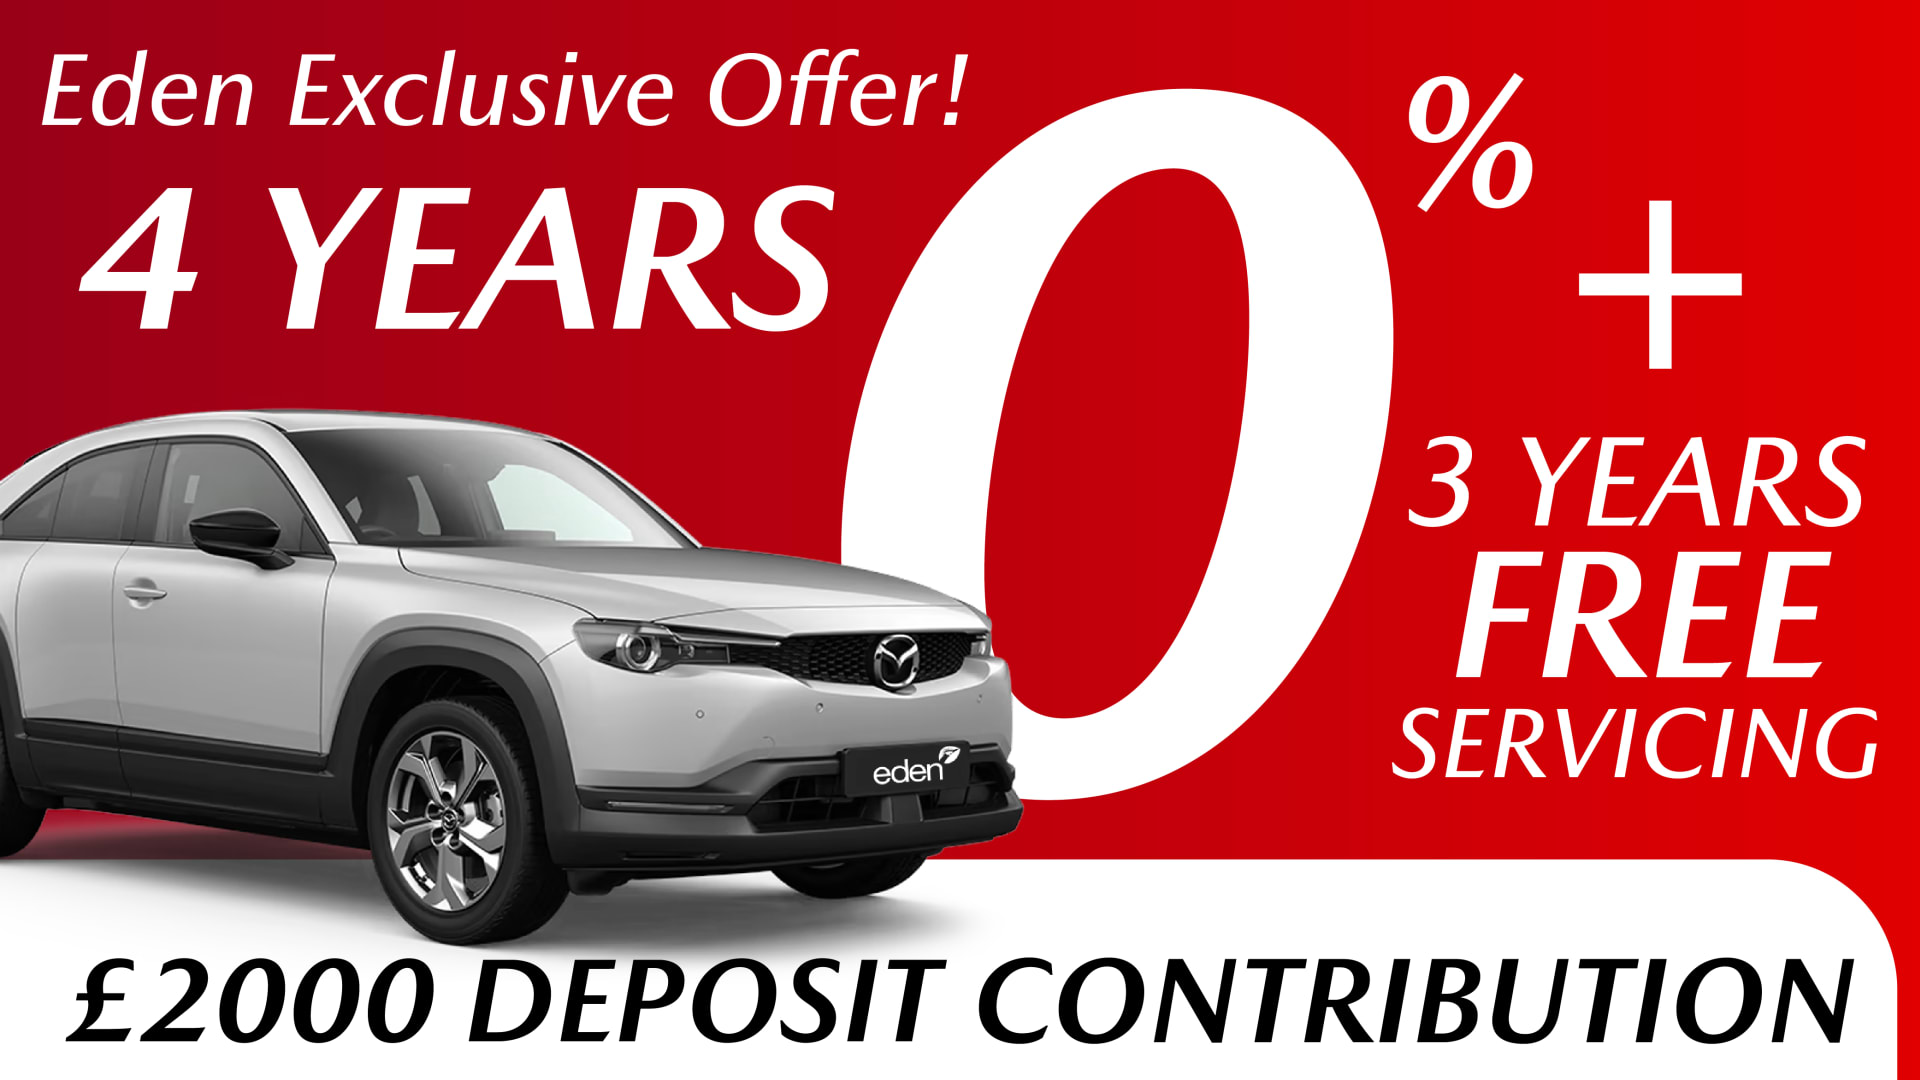 MX-30 4 Years 0% 3 Years FREE Servicing